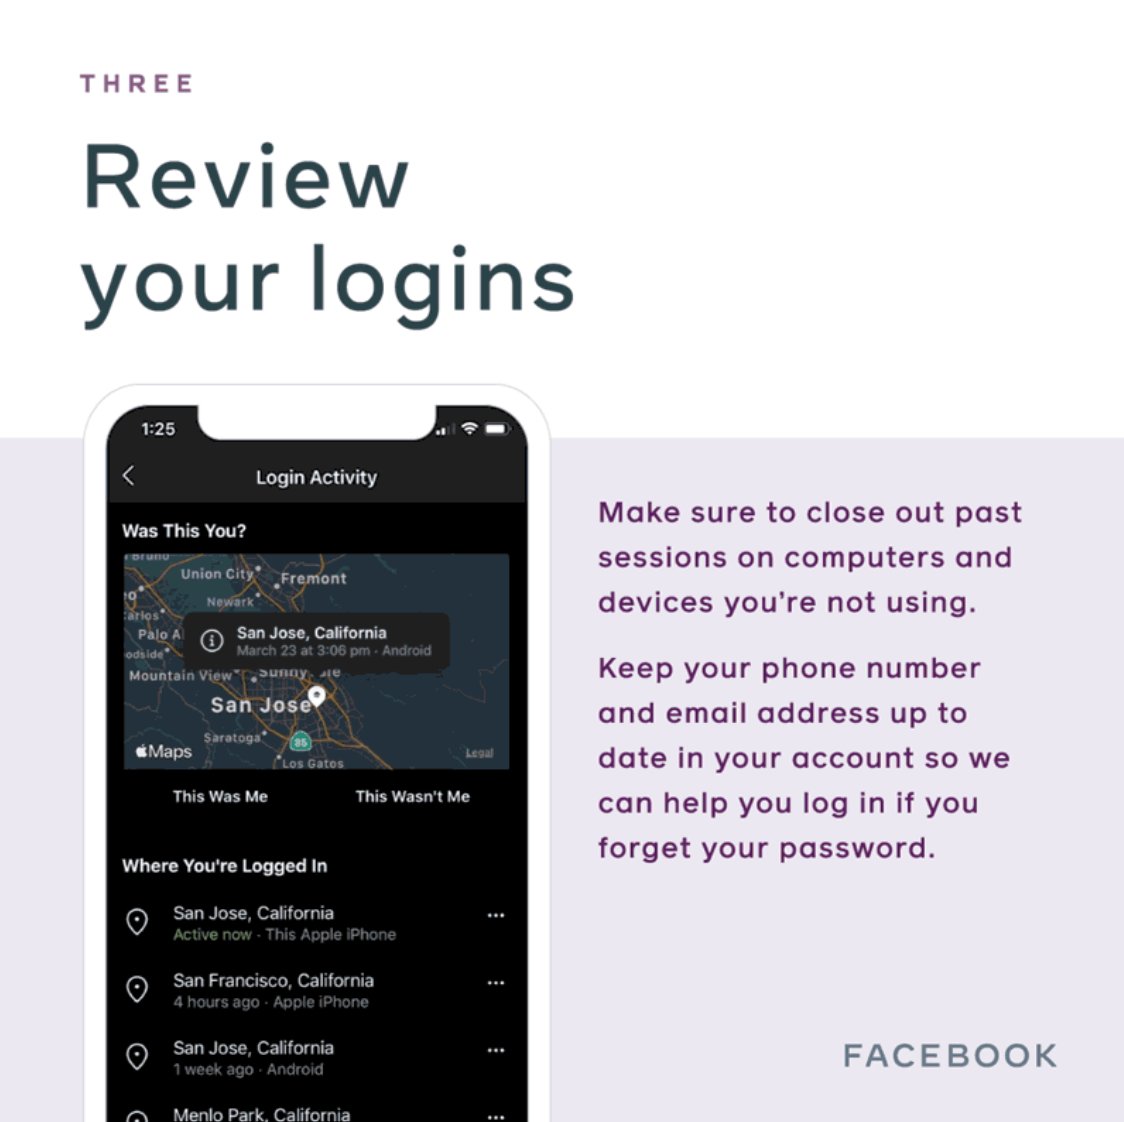 4/ Review your logins. Make sure to close out past sessions on computers and devices you’re not using. https://www.facebook.com/settings?tab=security